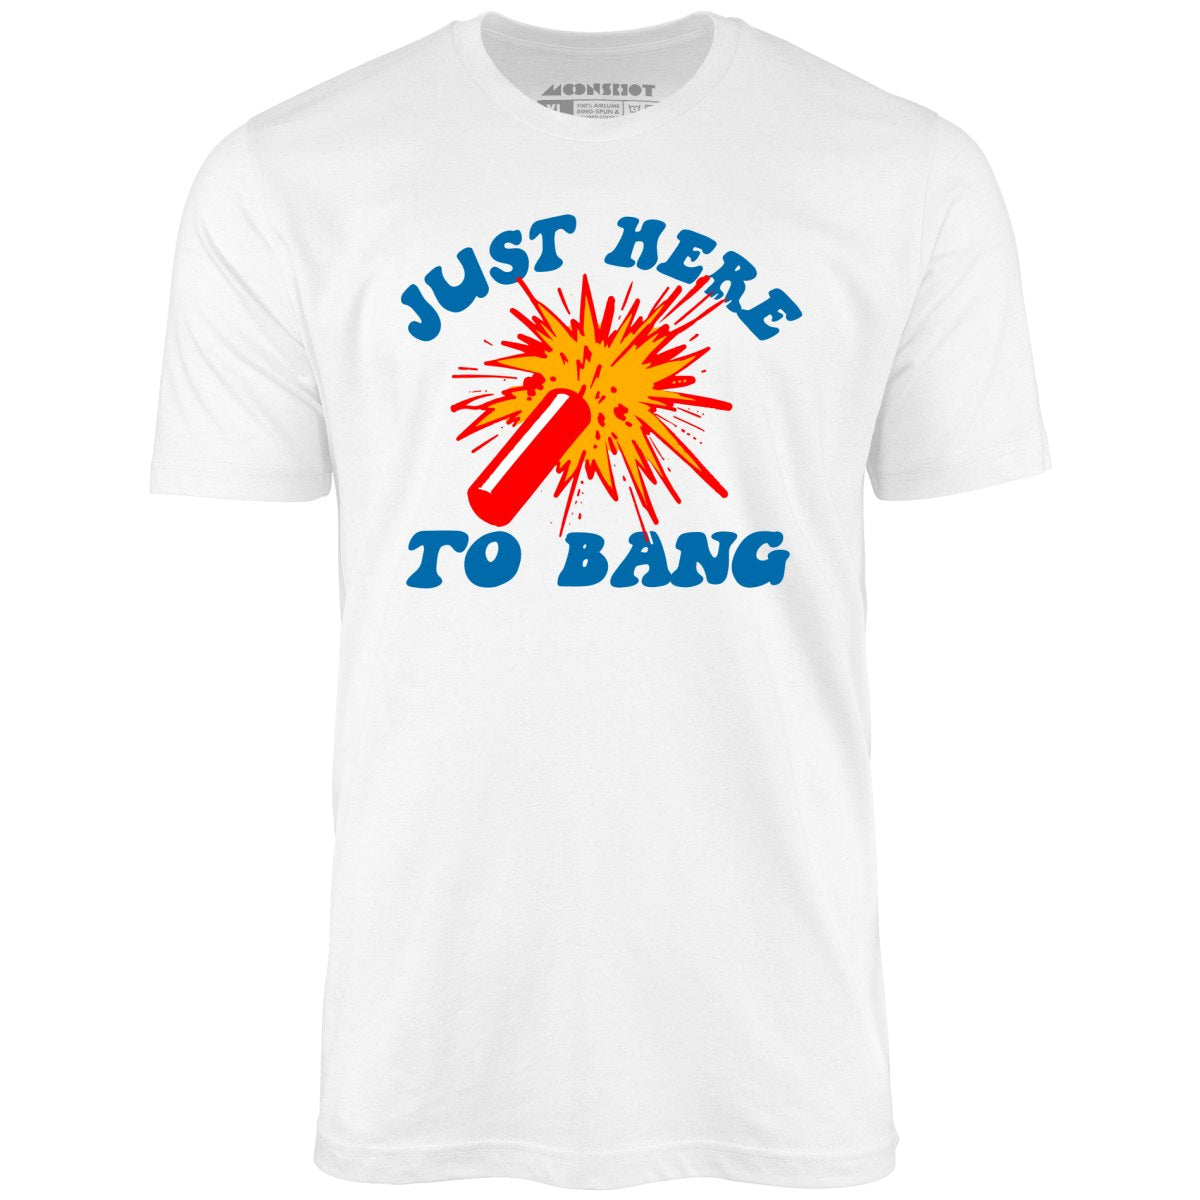 Just Here to Bang! - Unisex T-Shirt